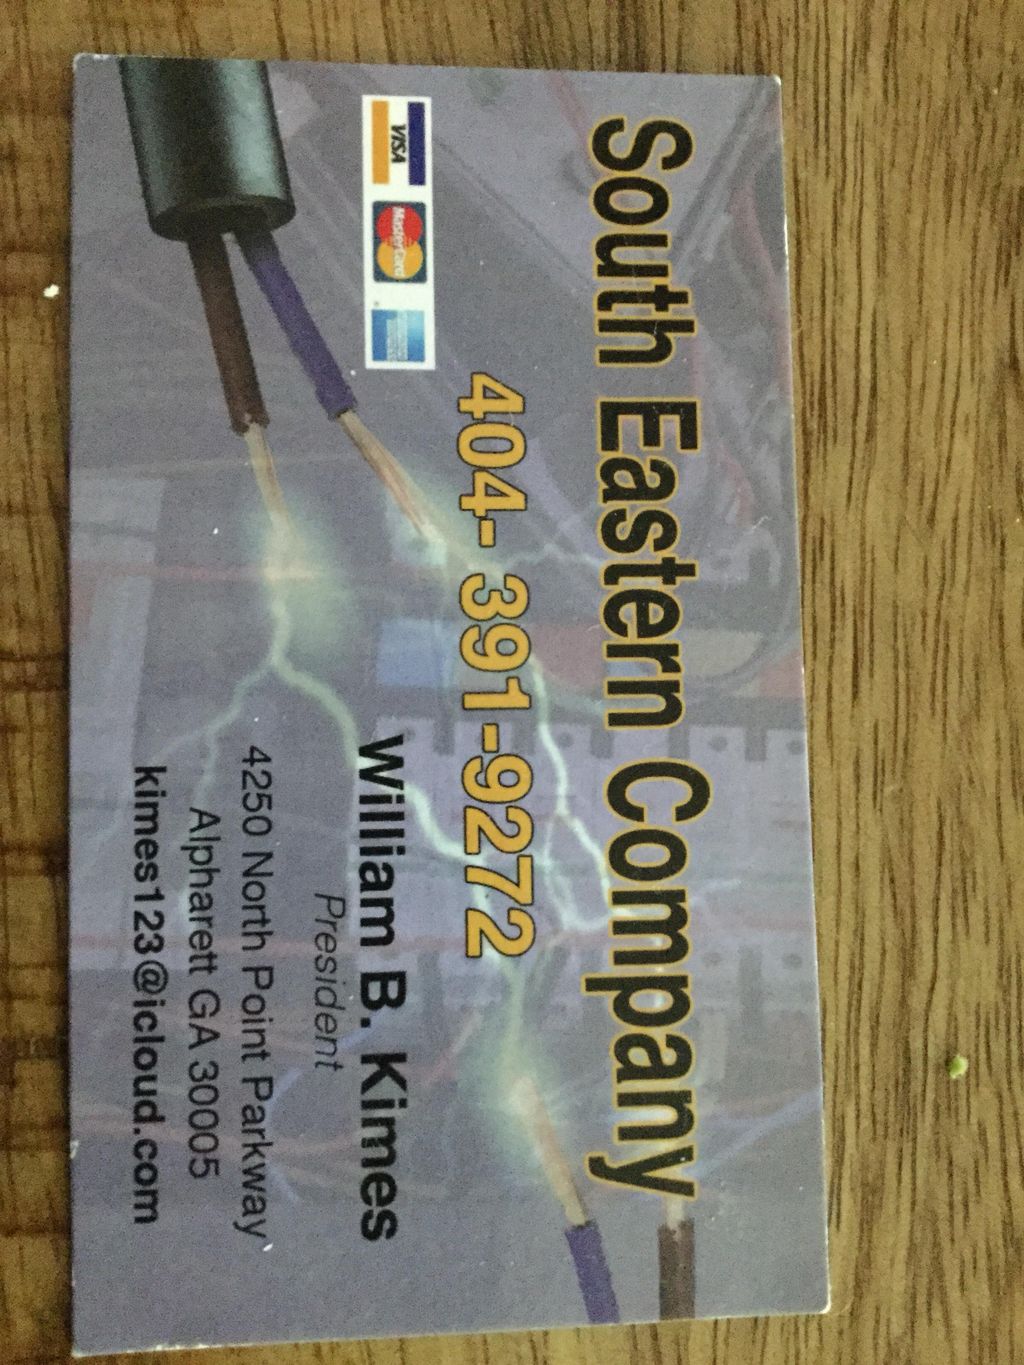 South Eastern Electrical company